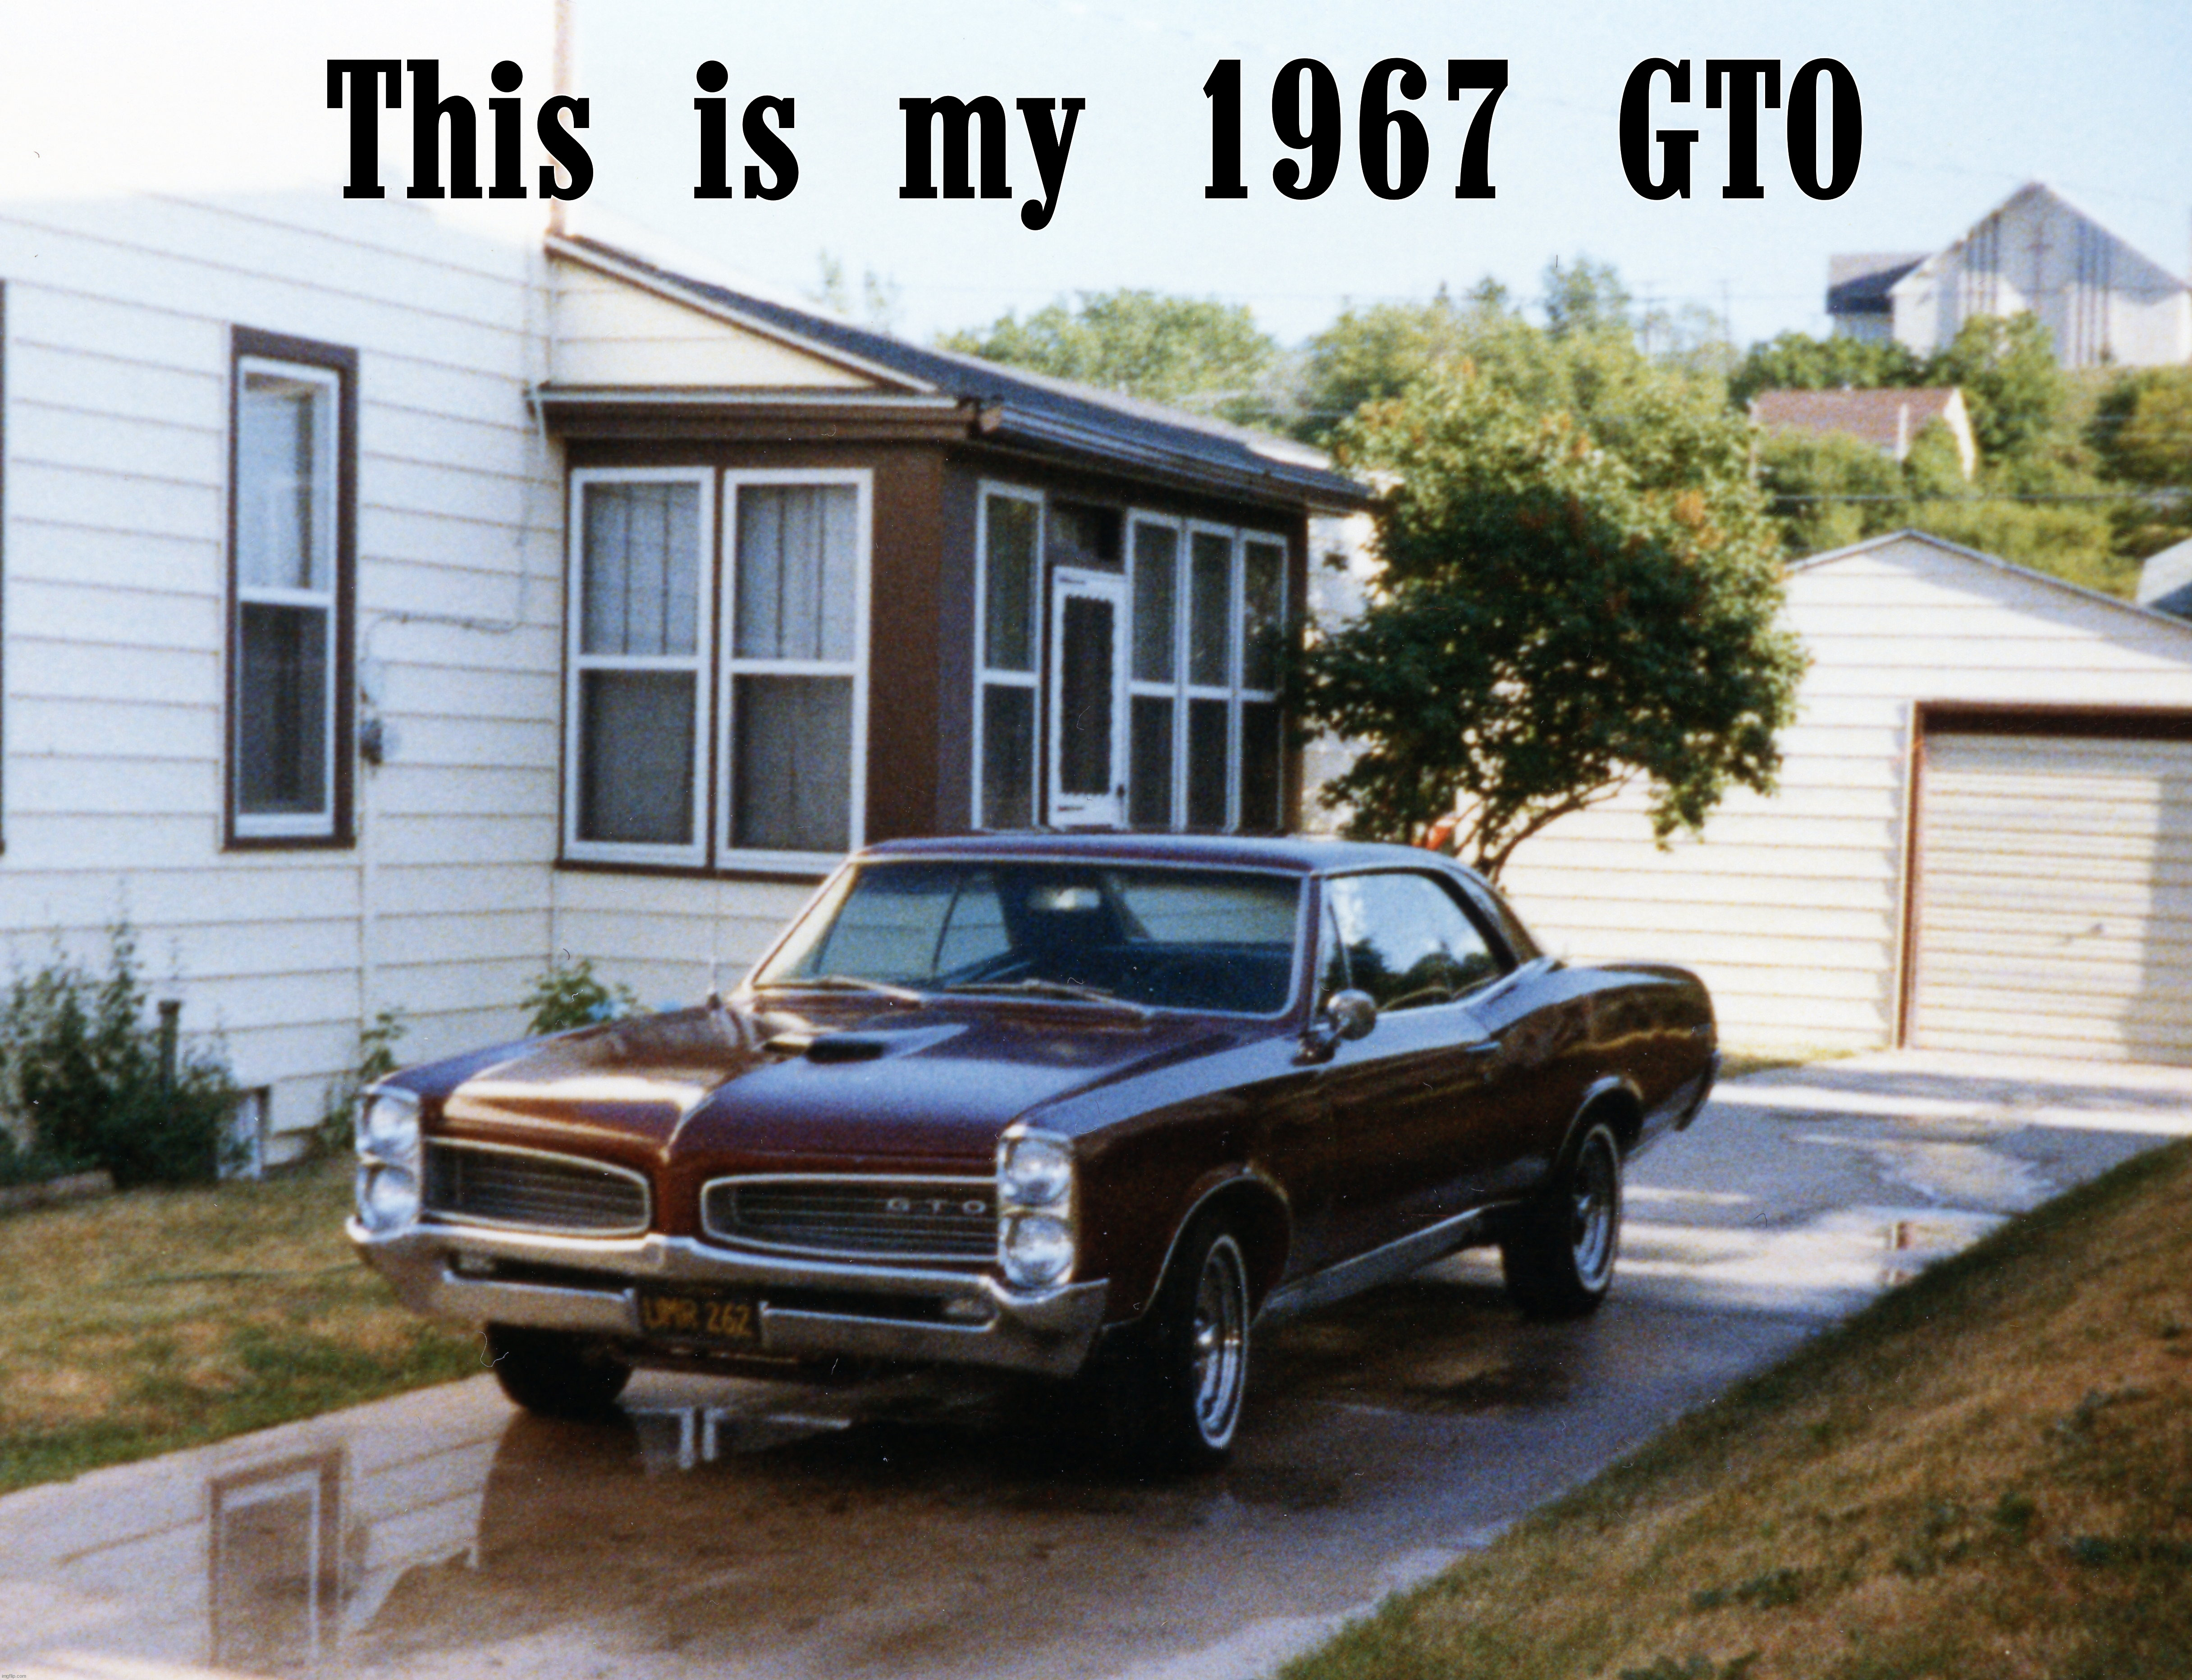 This is my 1967 GTO | image tagged in cars | made w/ Imgflip meme maker